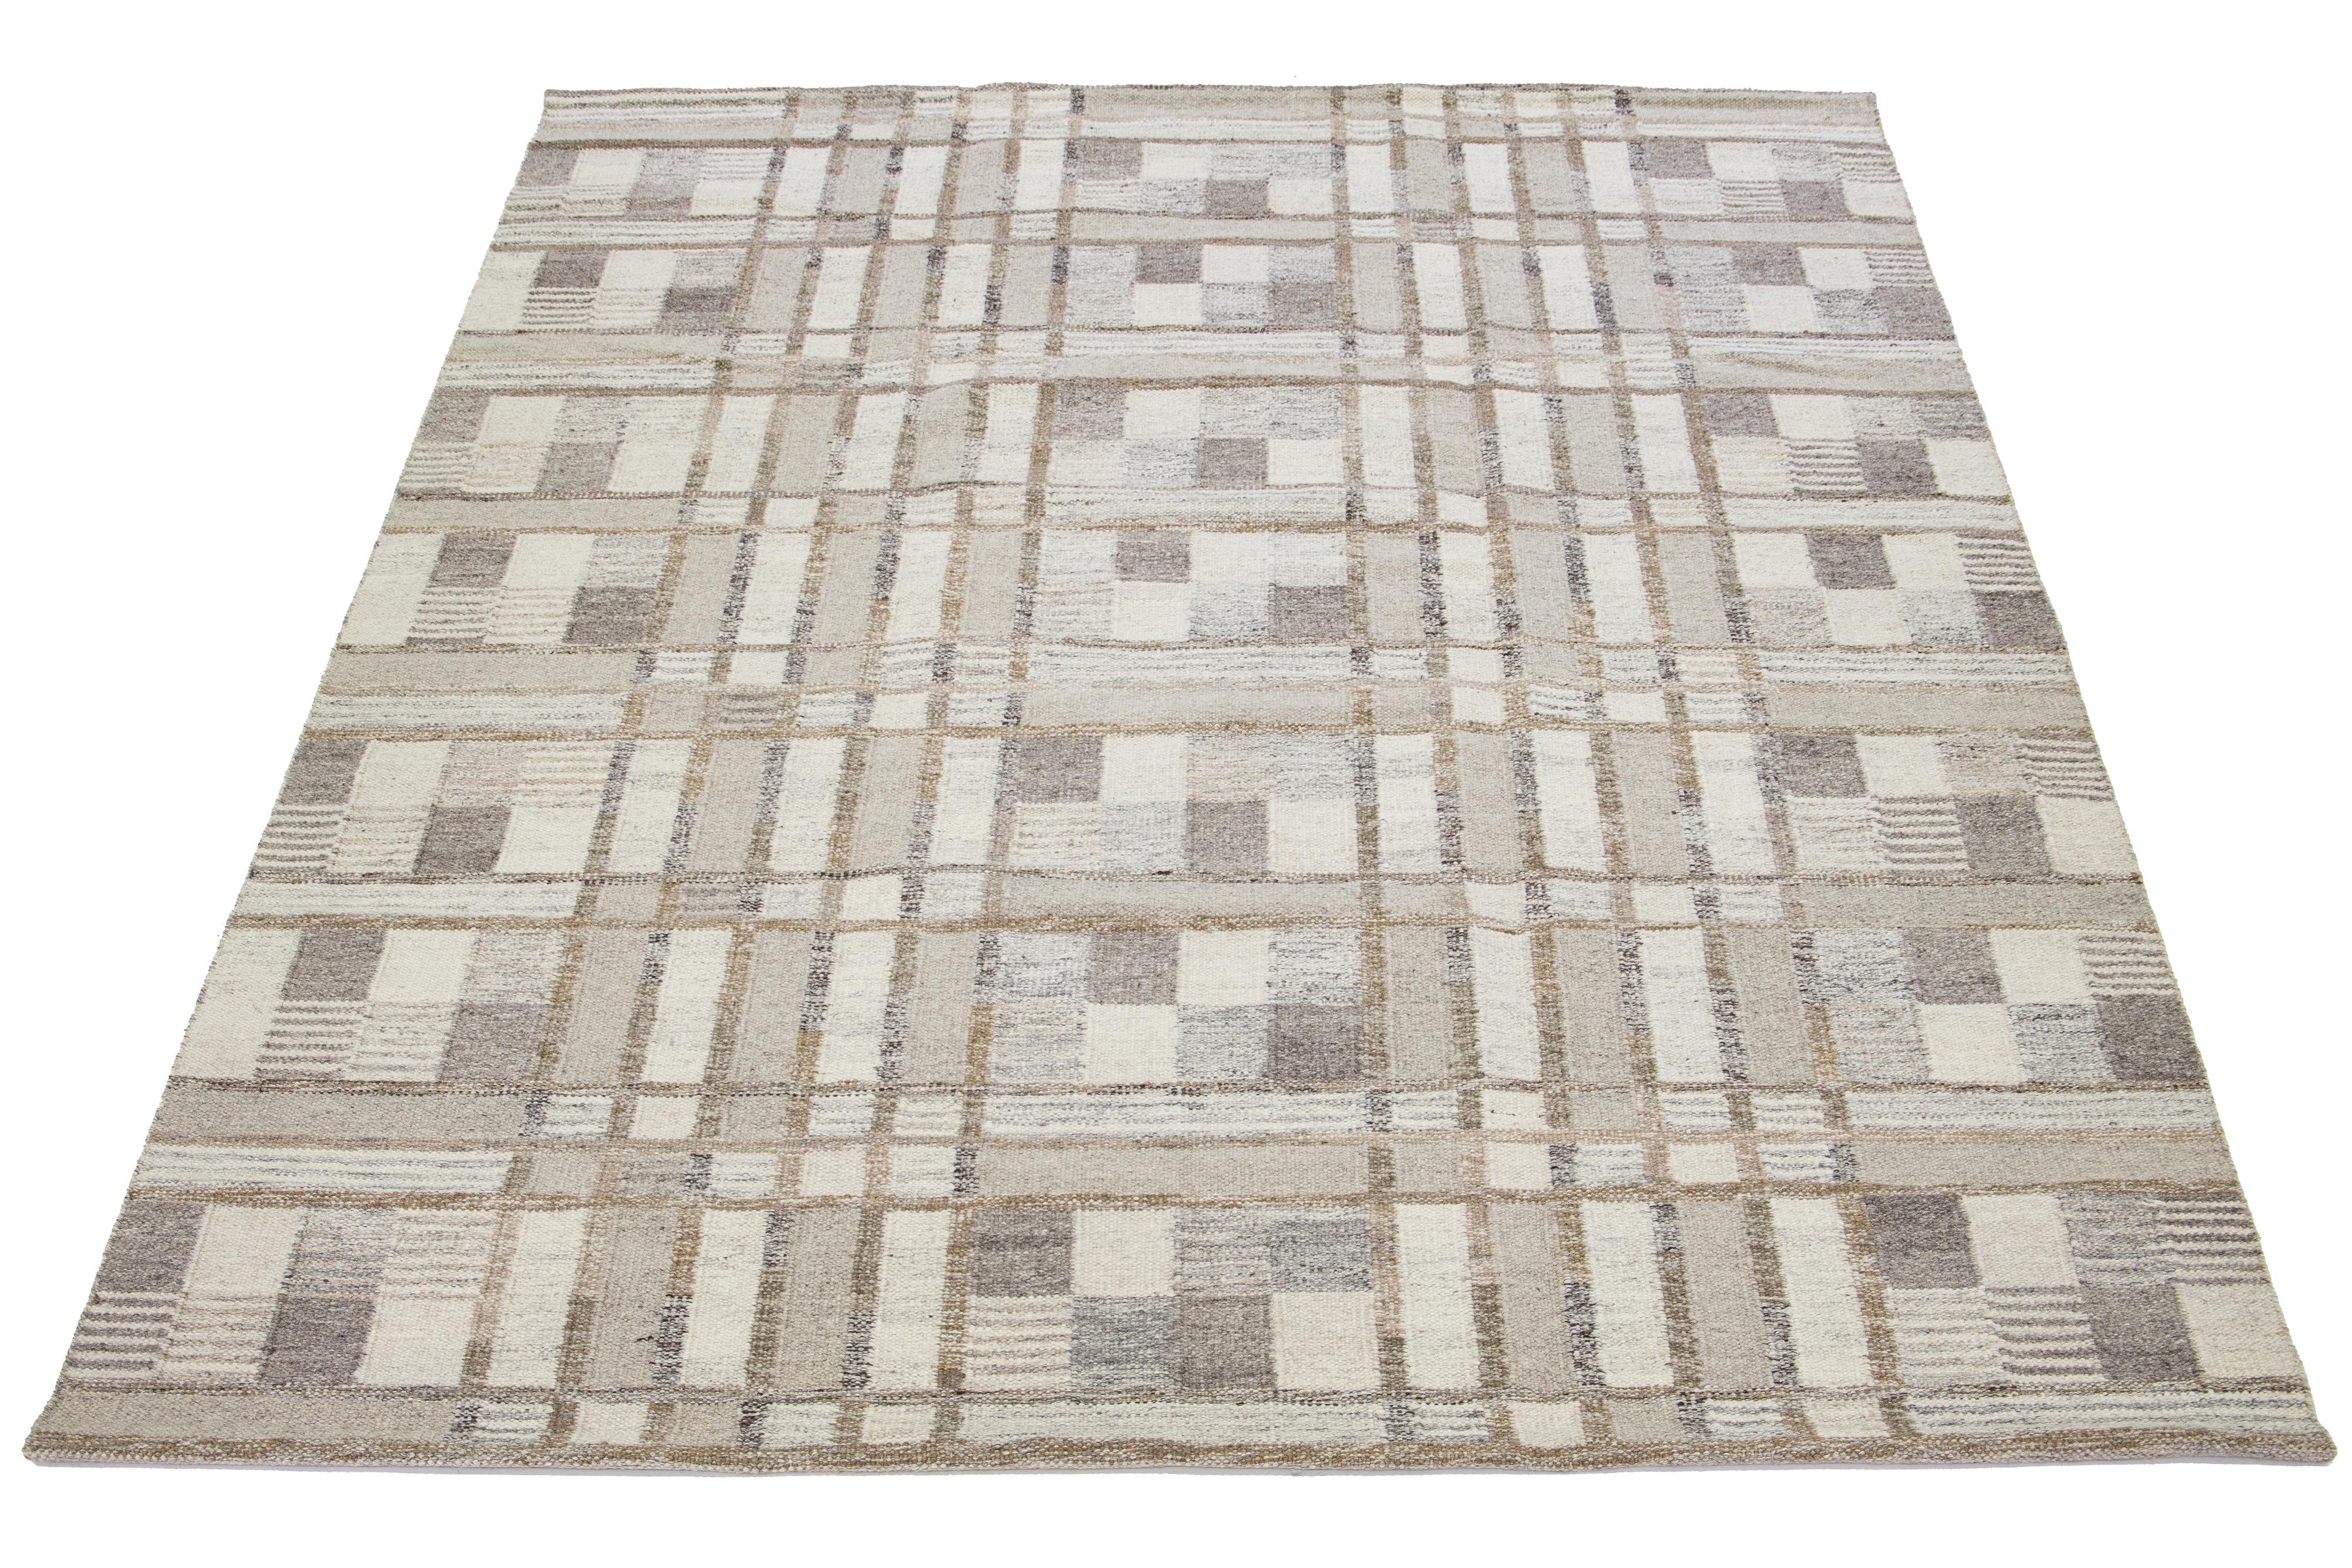 This flatweave rug features a chic contemporary Swedish design with a beige field color. It has a geometric pattern throughout the rug in ivory, gray, and brown shades.

 This rug measures 9'1